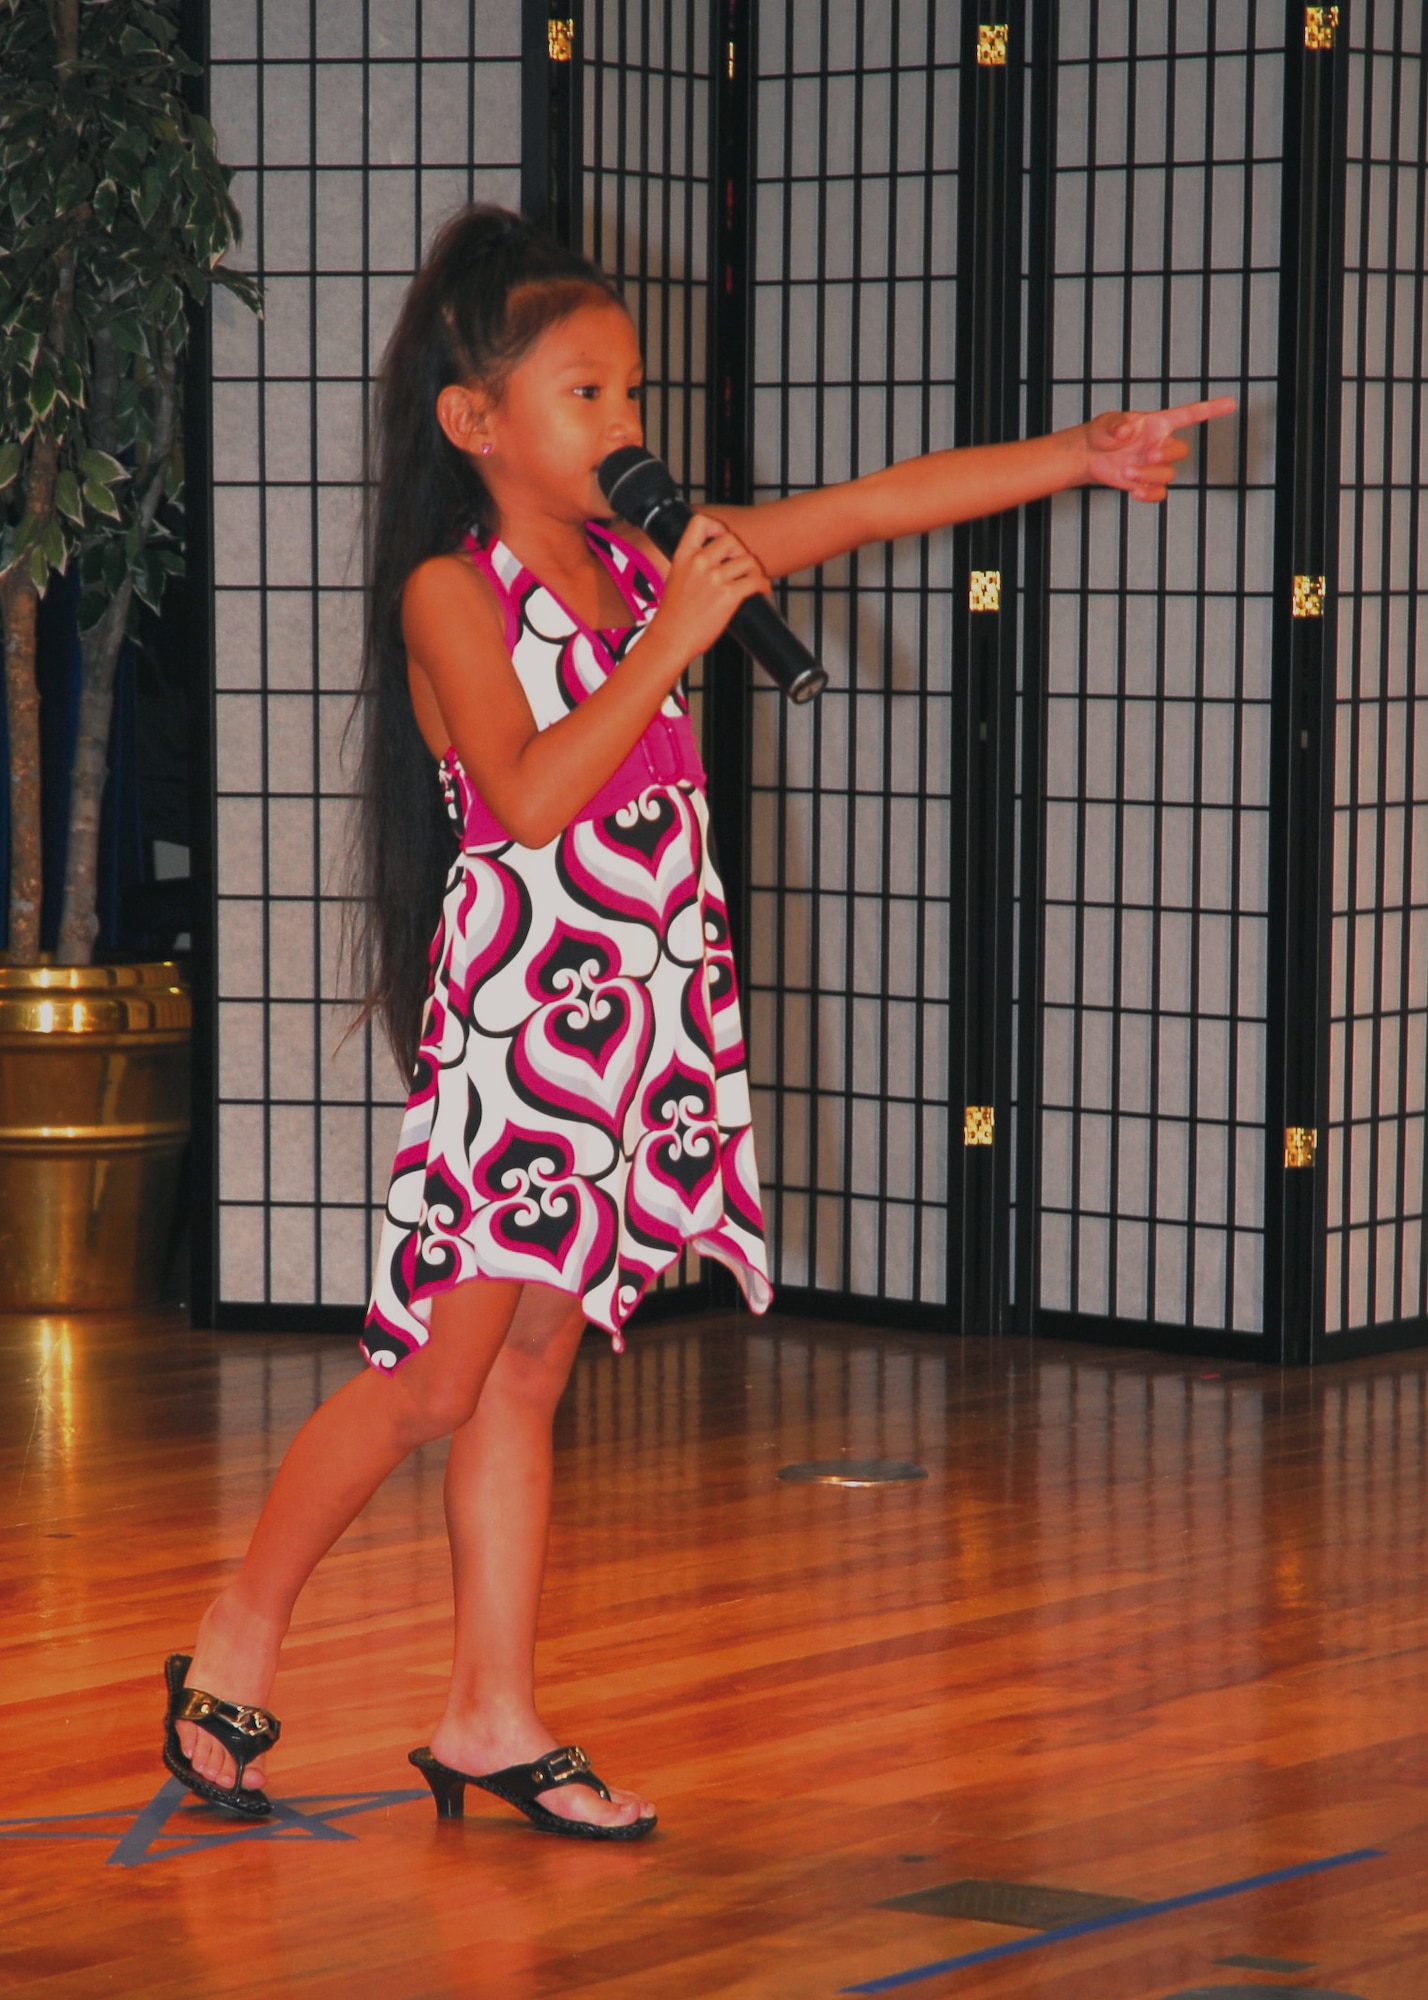 Taylore Gilmore performs Fergie’s “Clumsy” at the Family and Teen Talent Show at the Schilling Community Center Sept. 20, 2008. (U.S. Air Force photo/Airman 1st Class Amanda Grabiec)